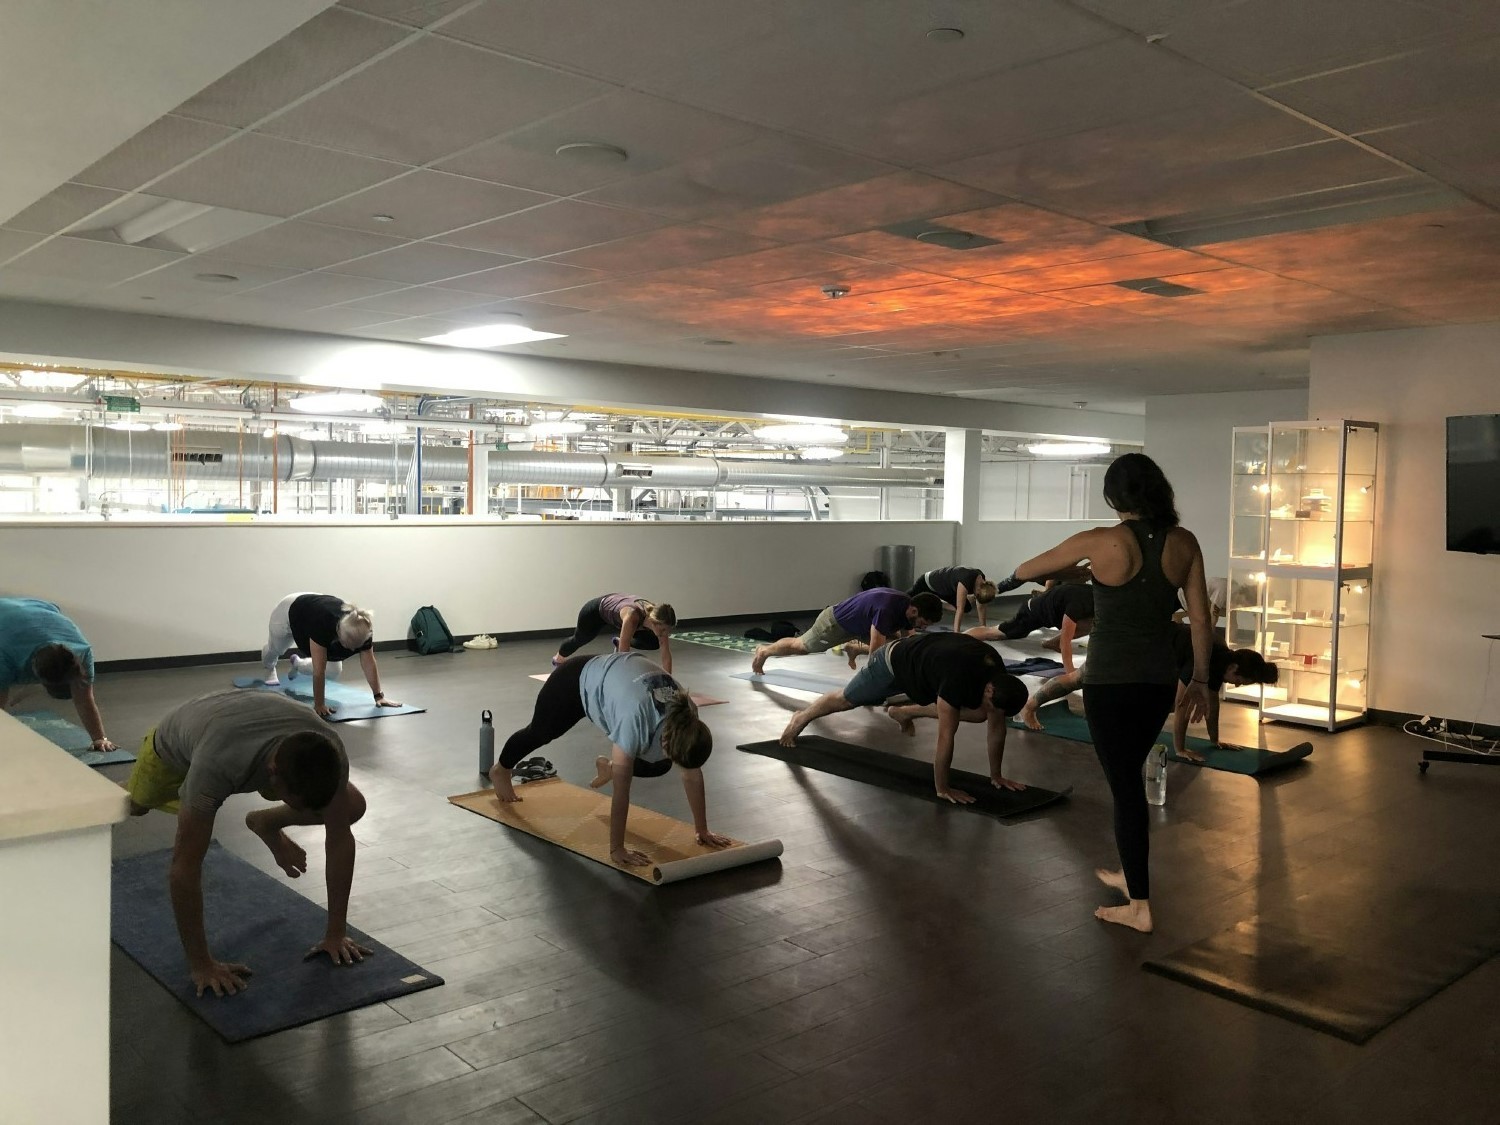 Every Friday, employees from our CCAM facility meet on the high bay mezzanine for an hour of Vinyasa Yoga.
